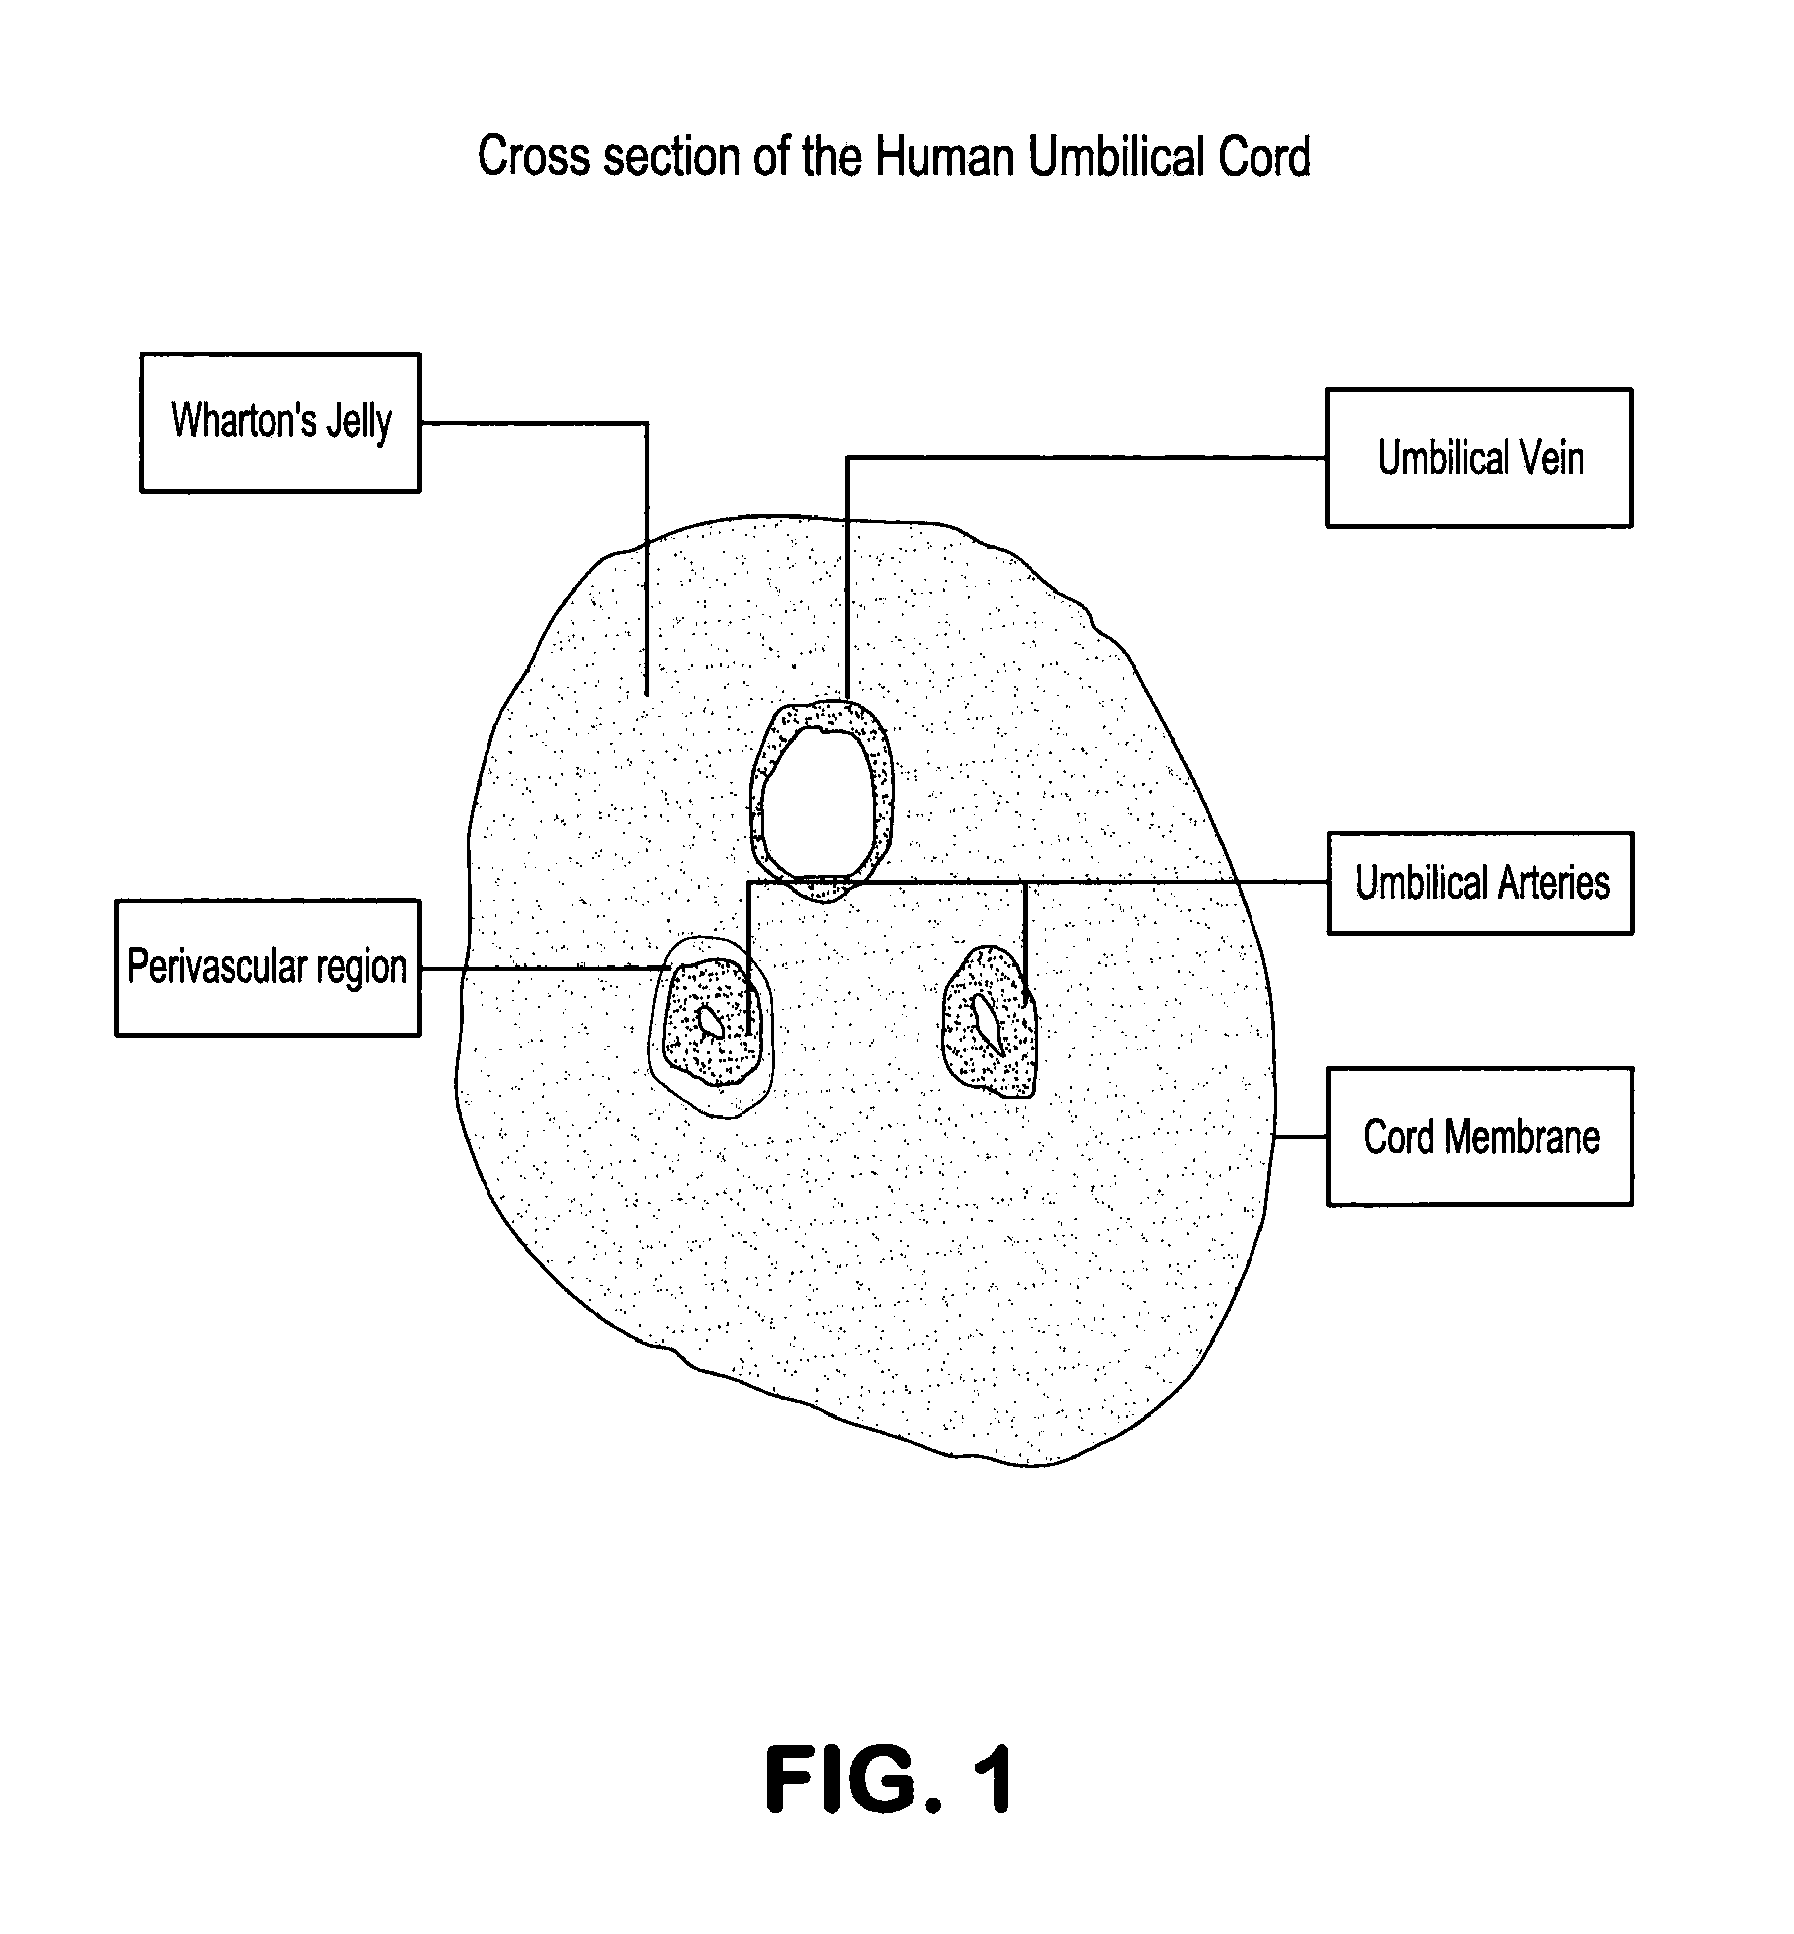 Methods for isolating mononuclear cells that include a subpopulation of mesenchymal progenitor cells and vascular cells that include a subpopulation of endothelial progenitor cells from umbilical cord tissue